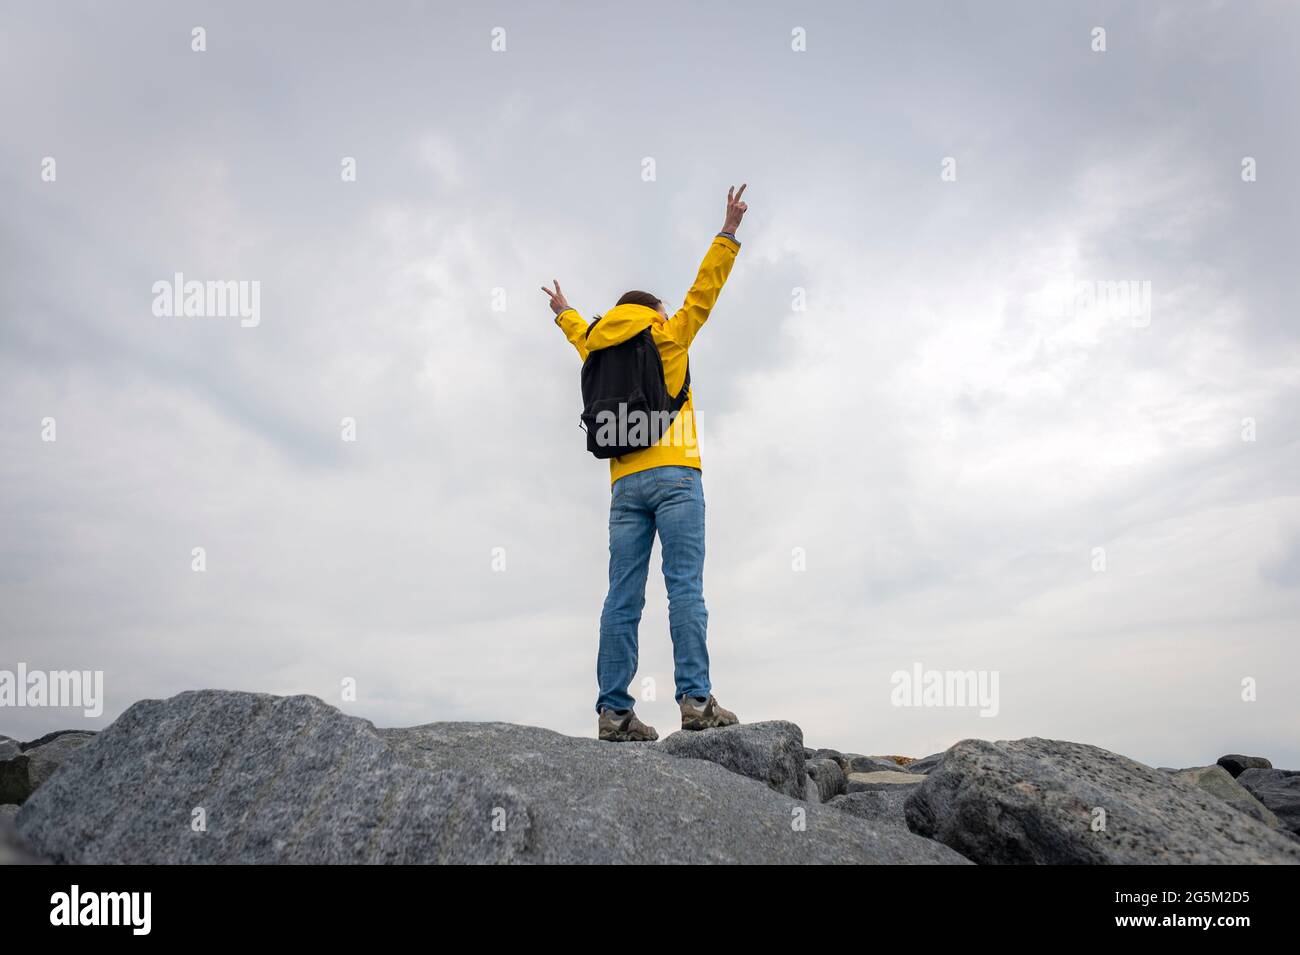 Back view of a person wearing a yellow outdoor jacket on the summit of rocks with arms raised in achievement. Stock Photo